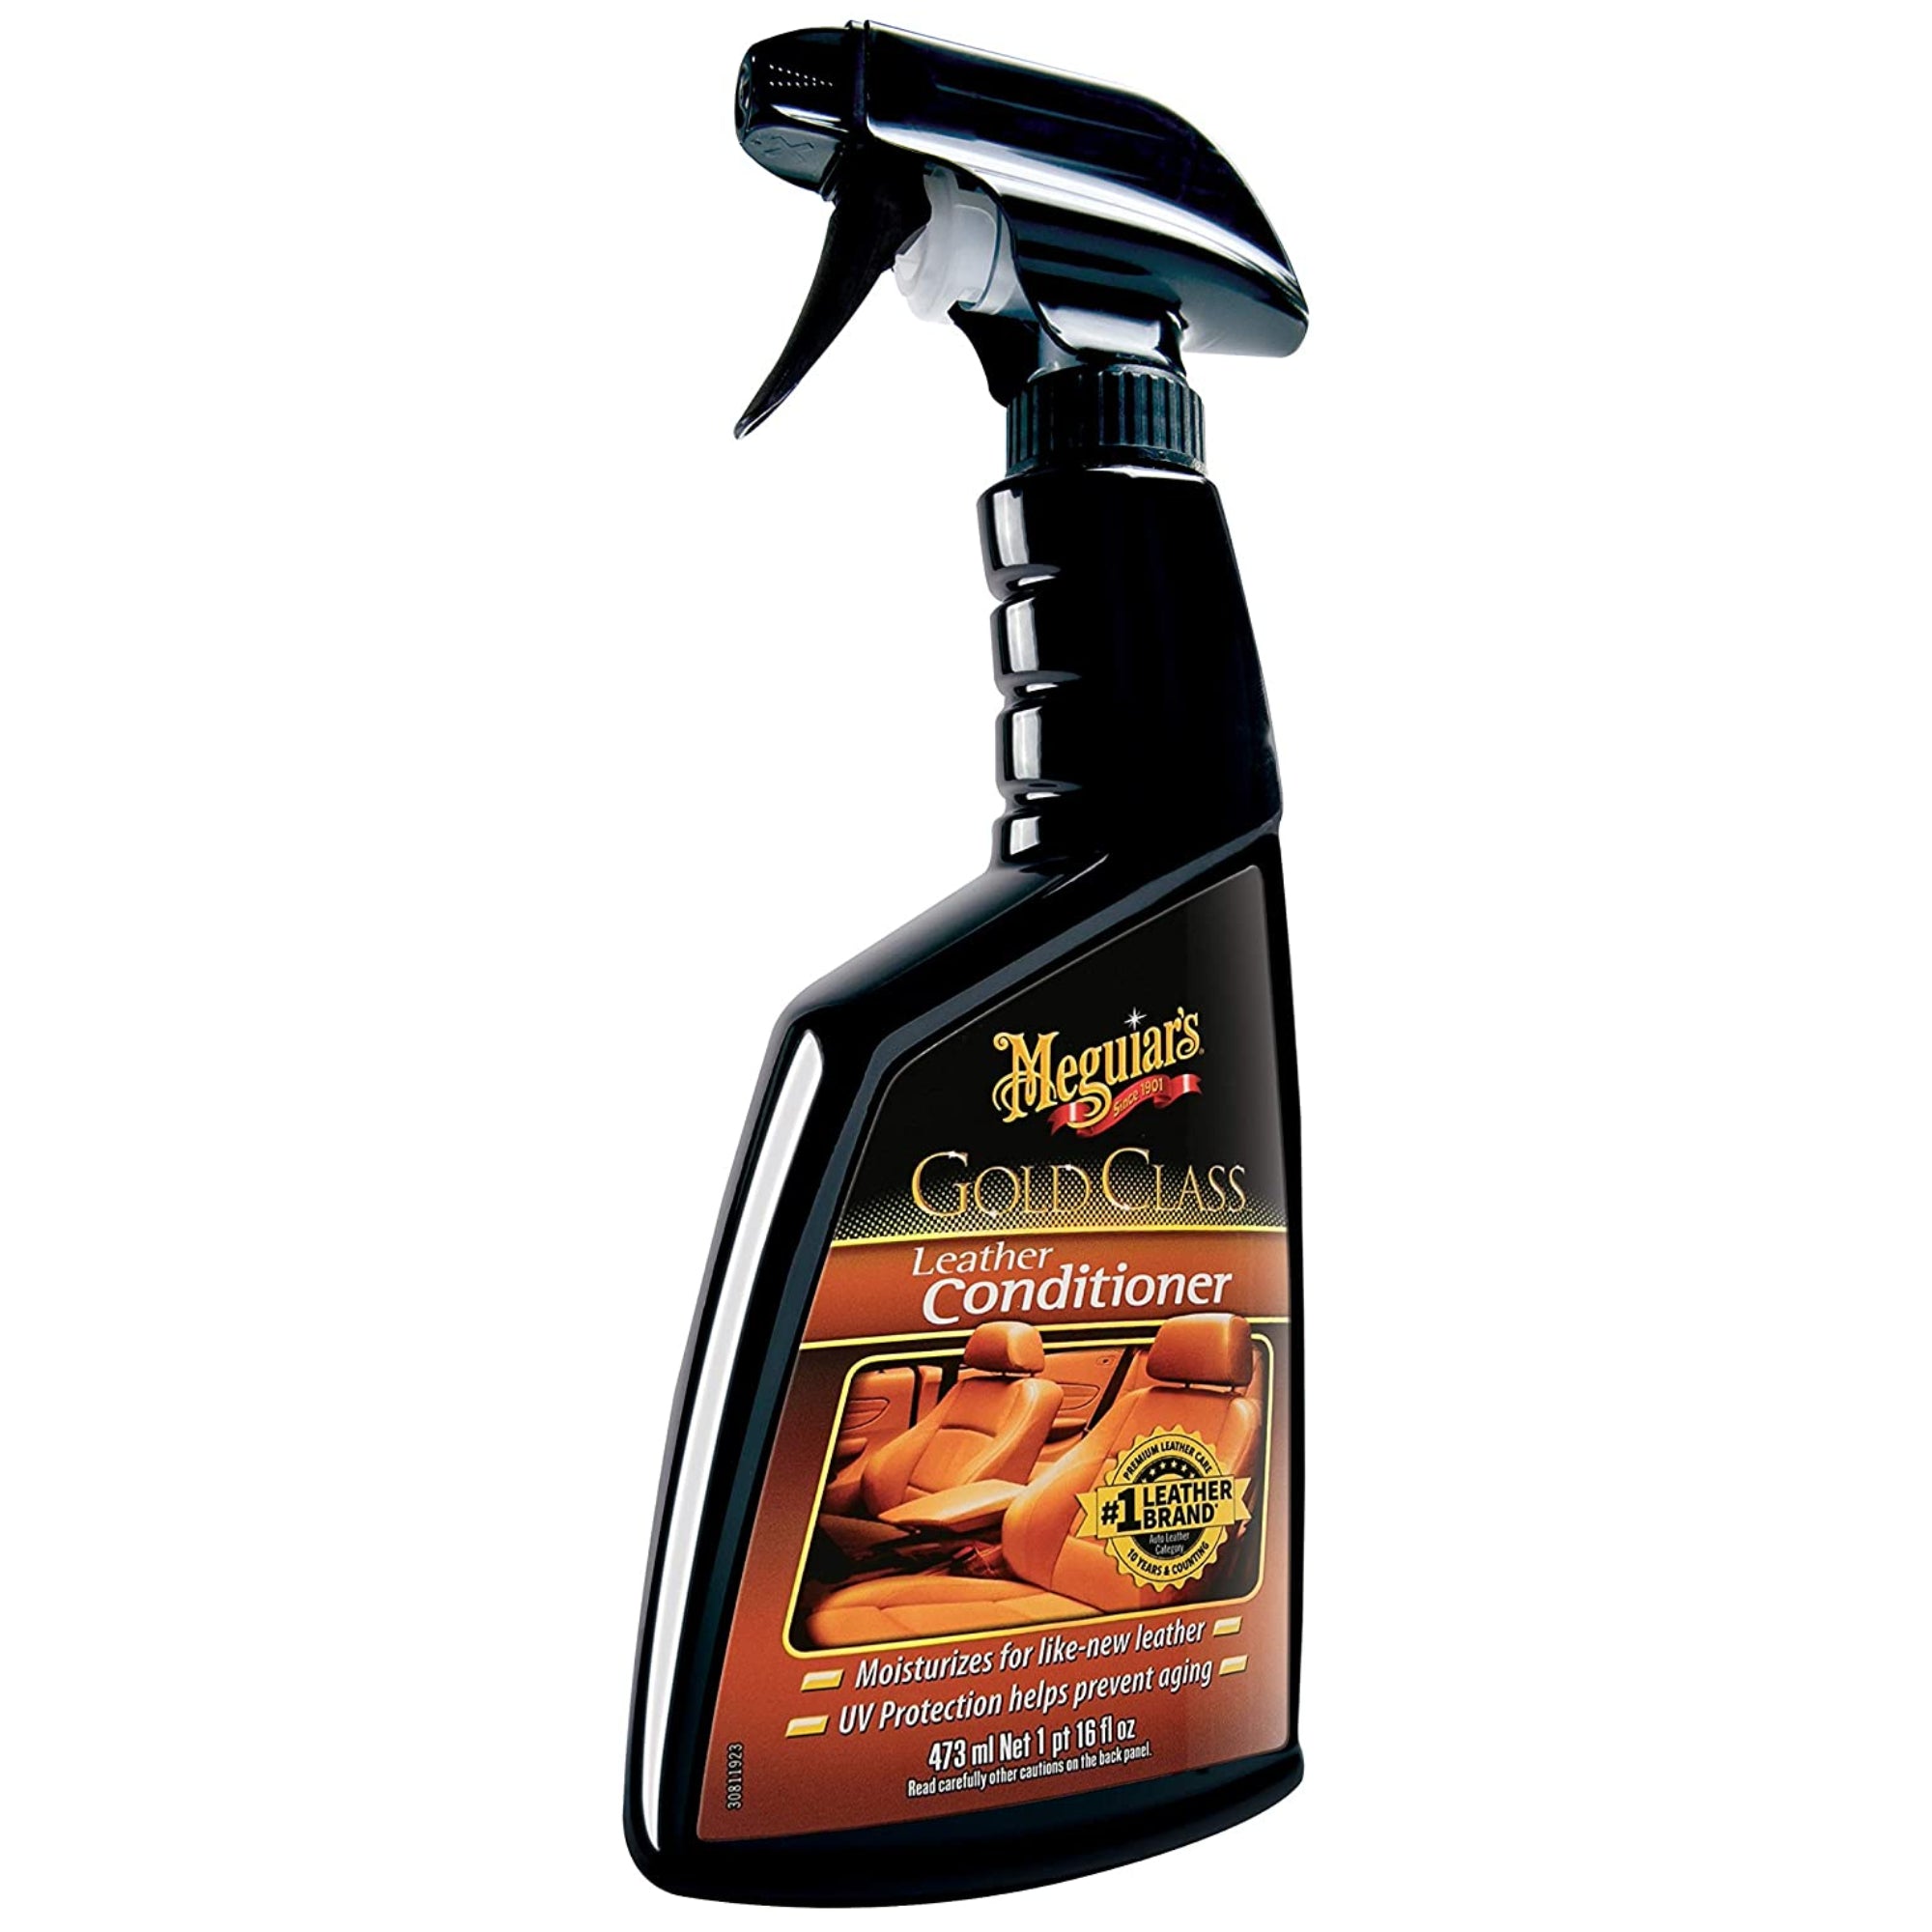 Meguiars Gold Class Leather Conditioner 473ml